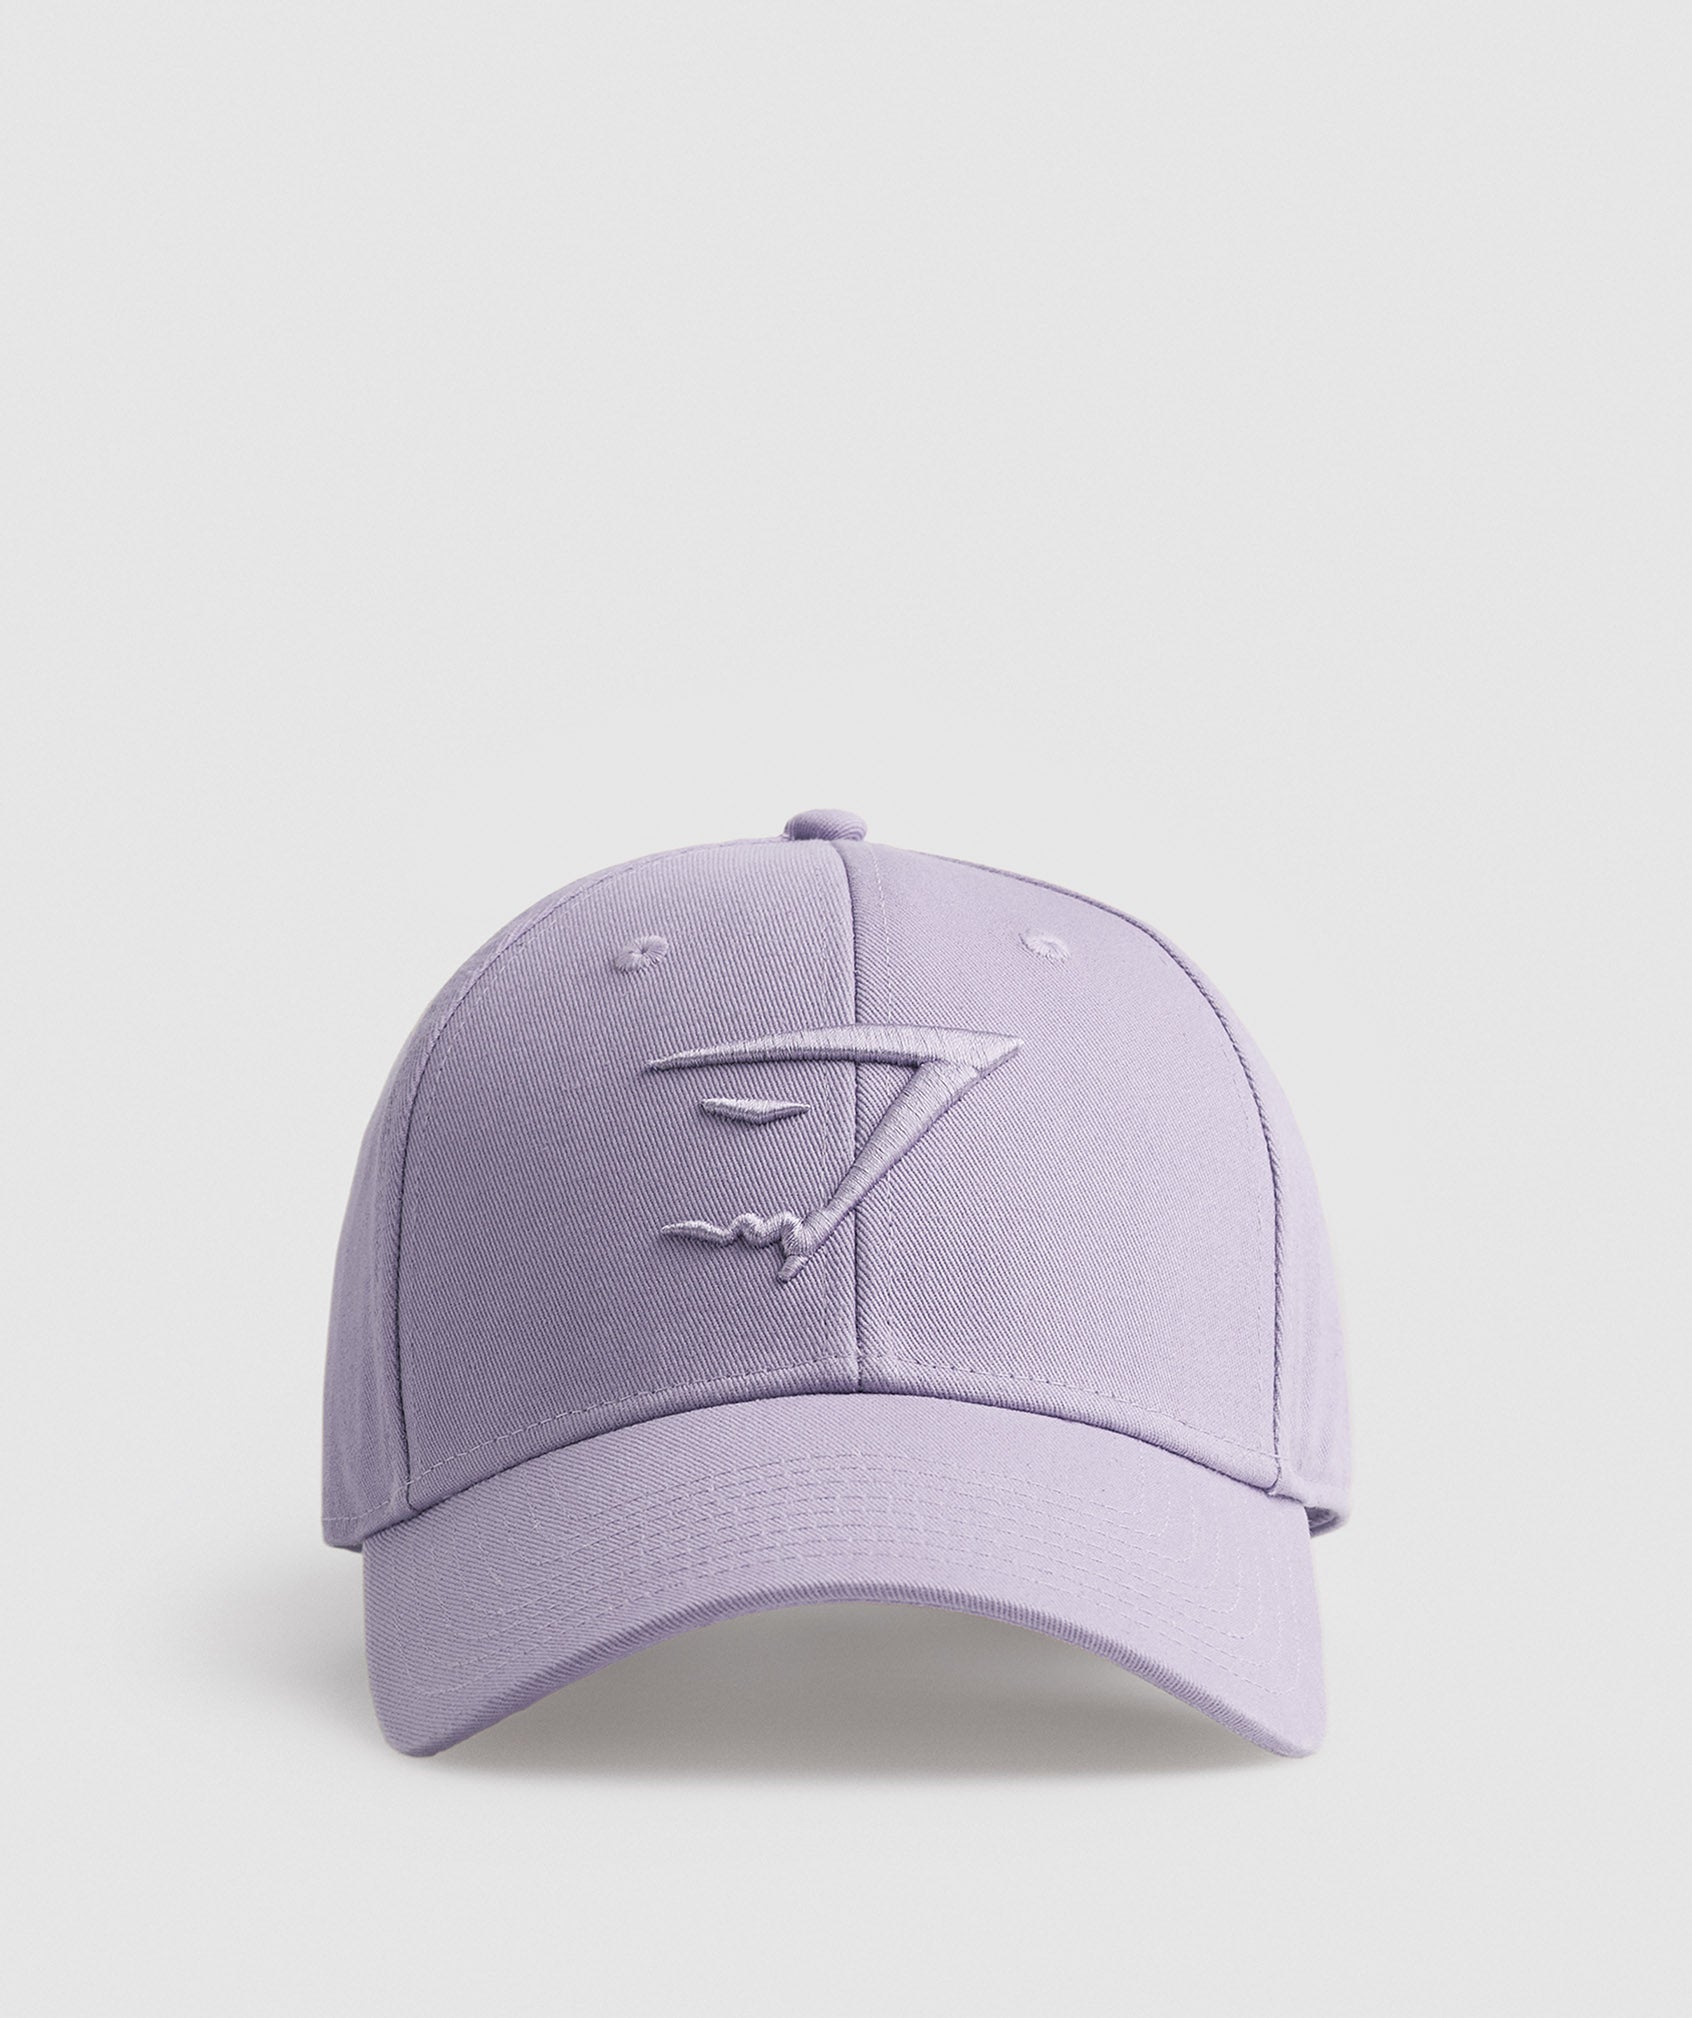 Sharkhead Cap in Shaded Lilac - view 1